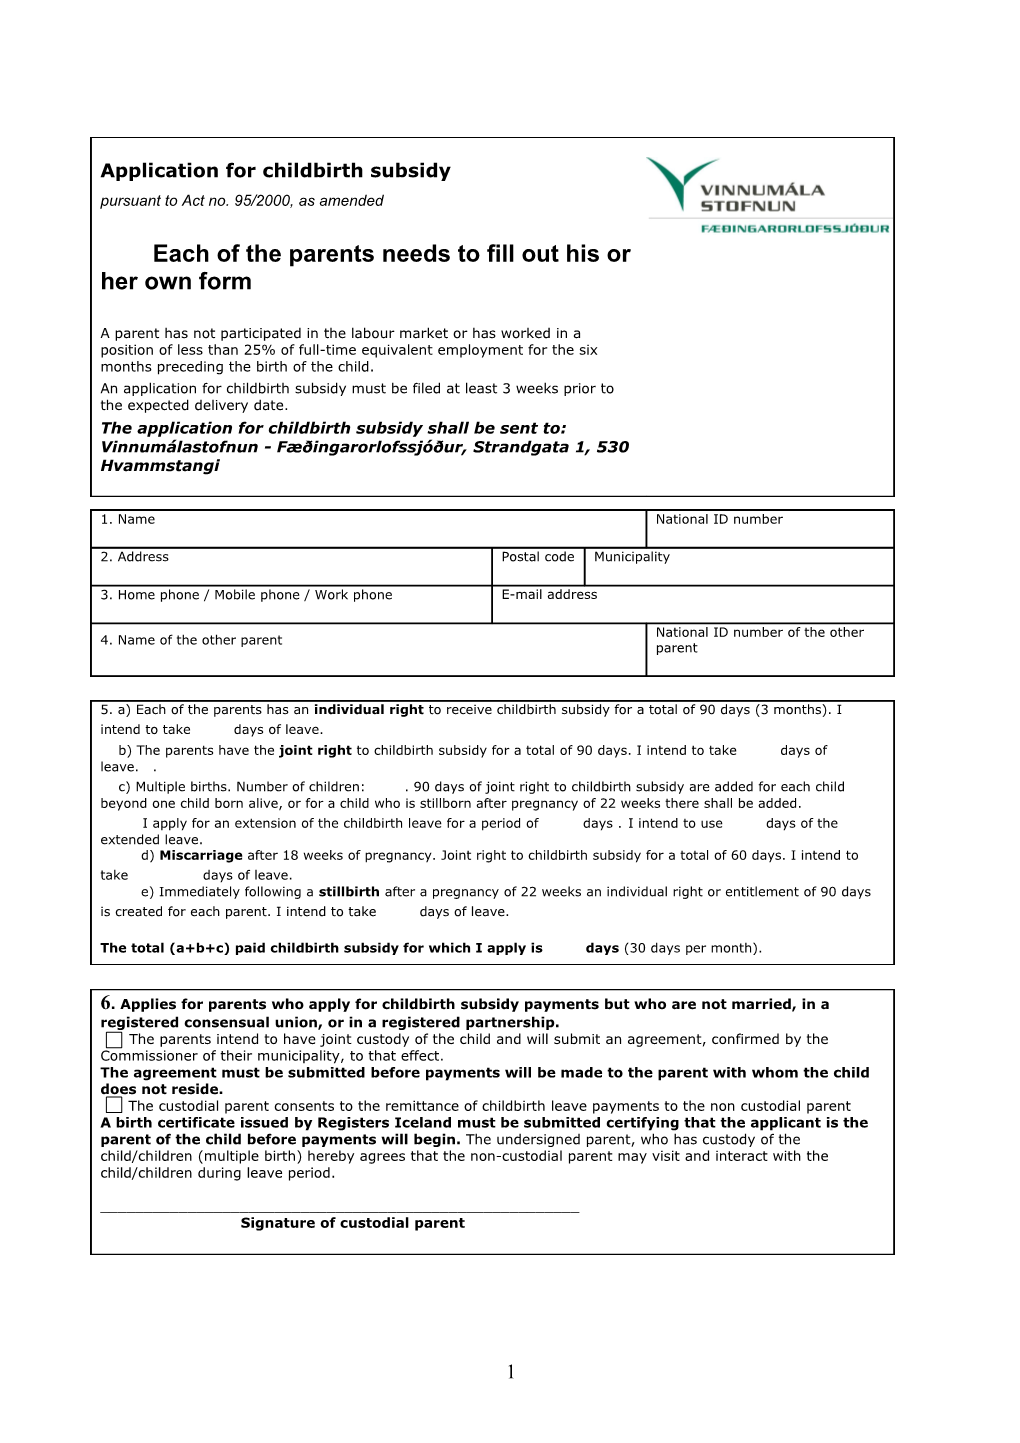 Application for Childbirth Subsidy